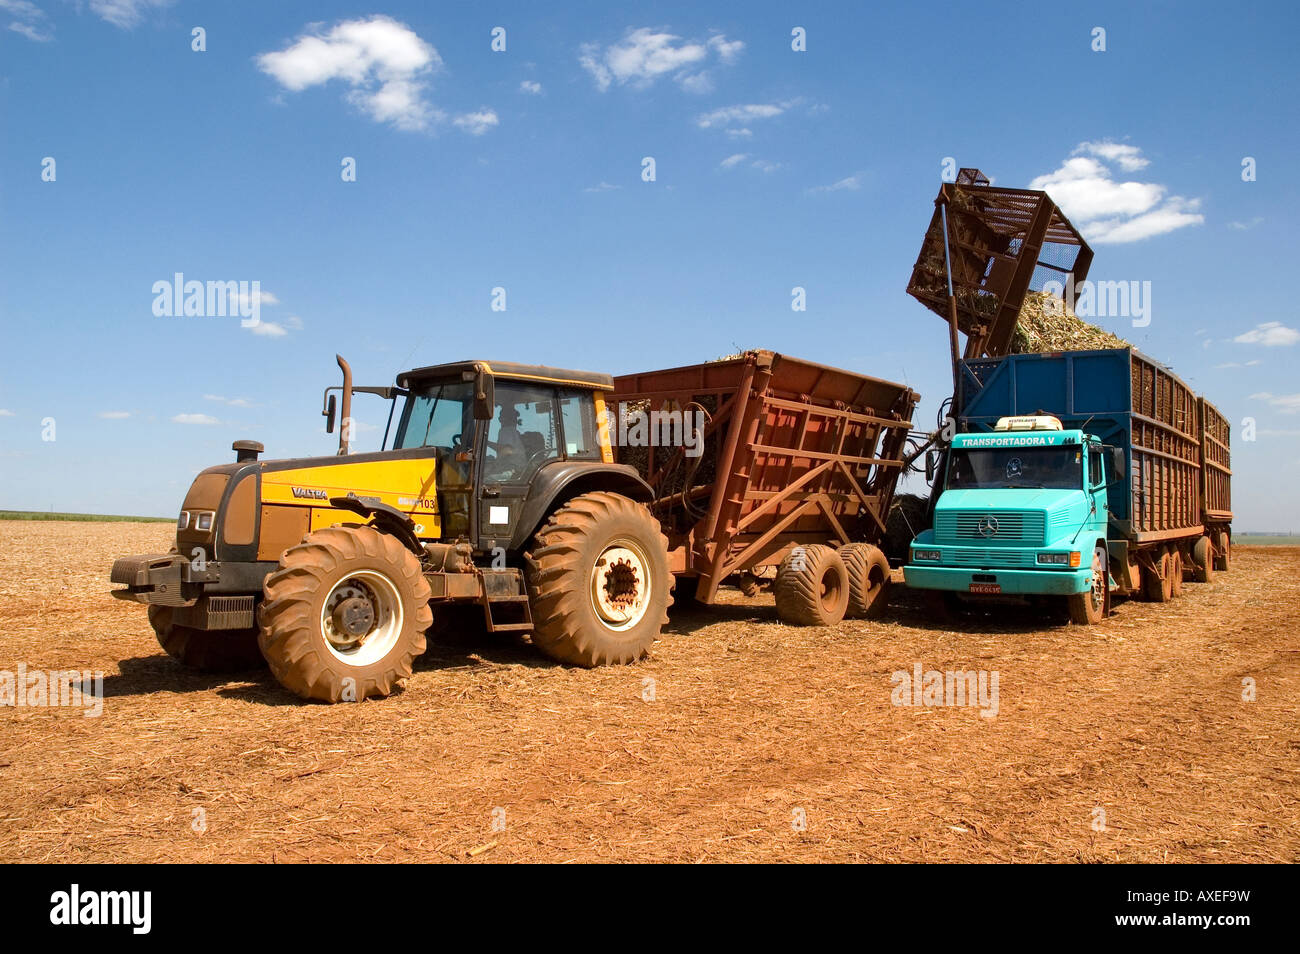 Truck and tractor harvesting cane Stock Photo